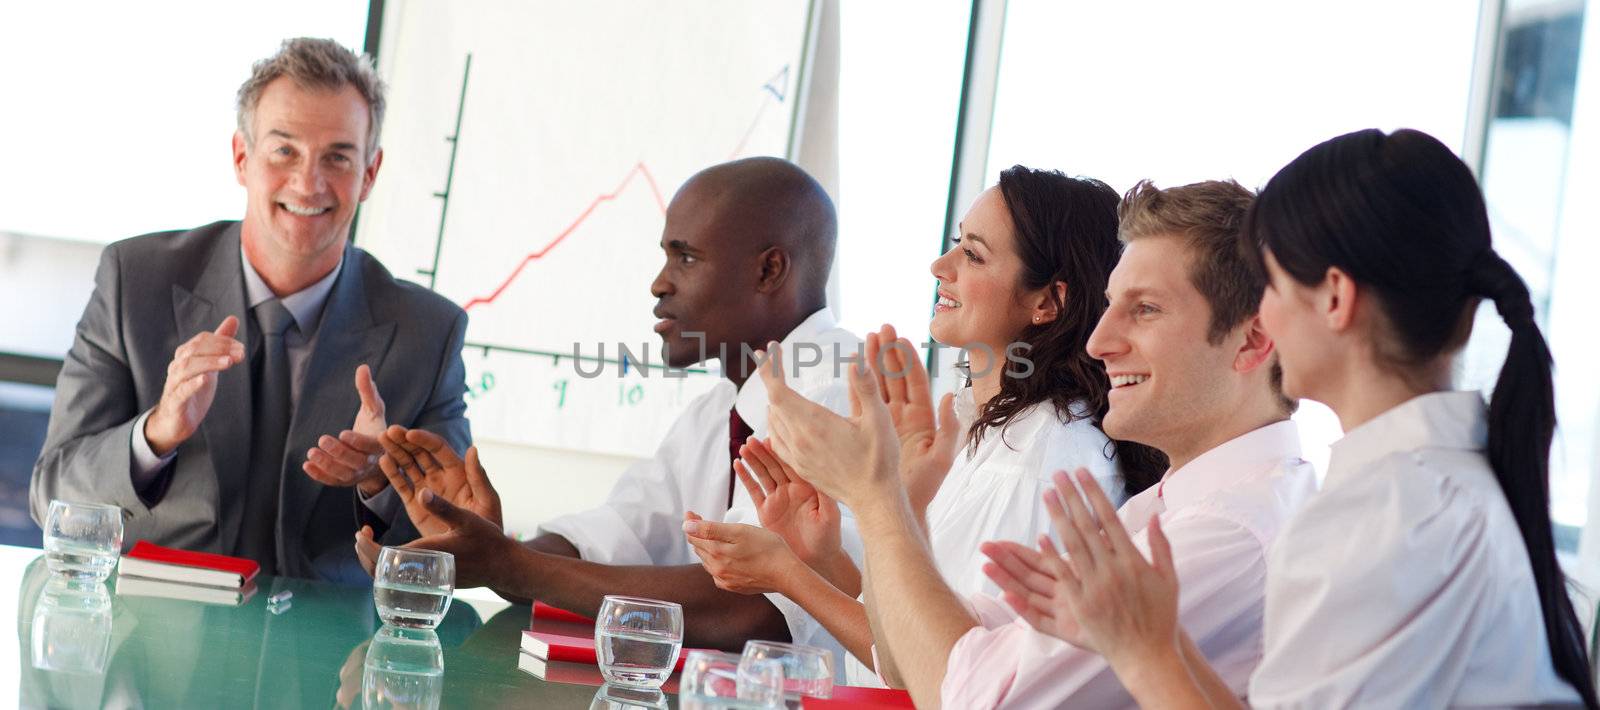 International business people clapping in a meeting